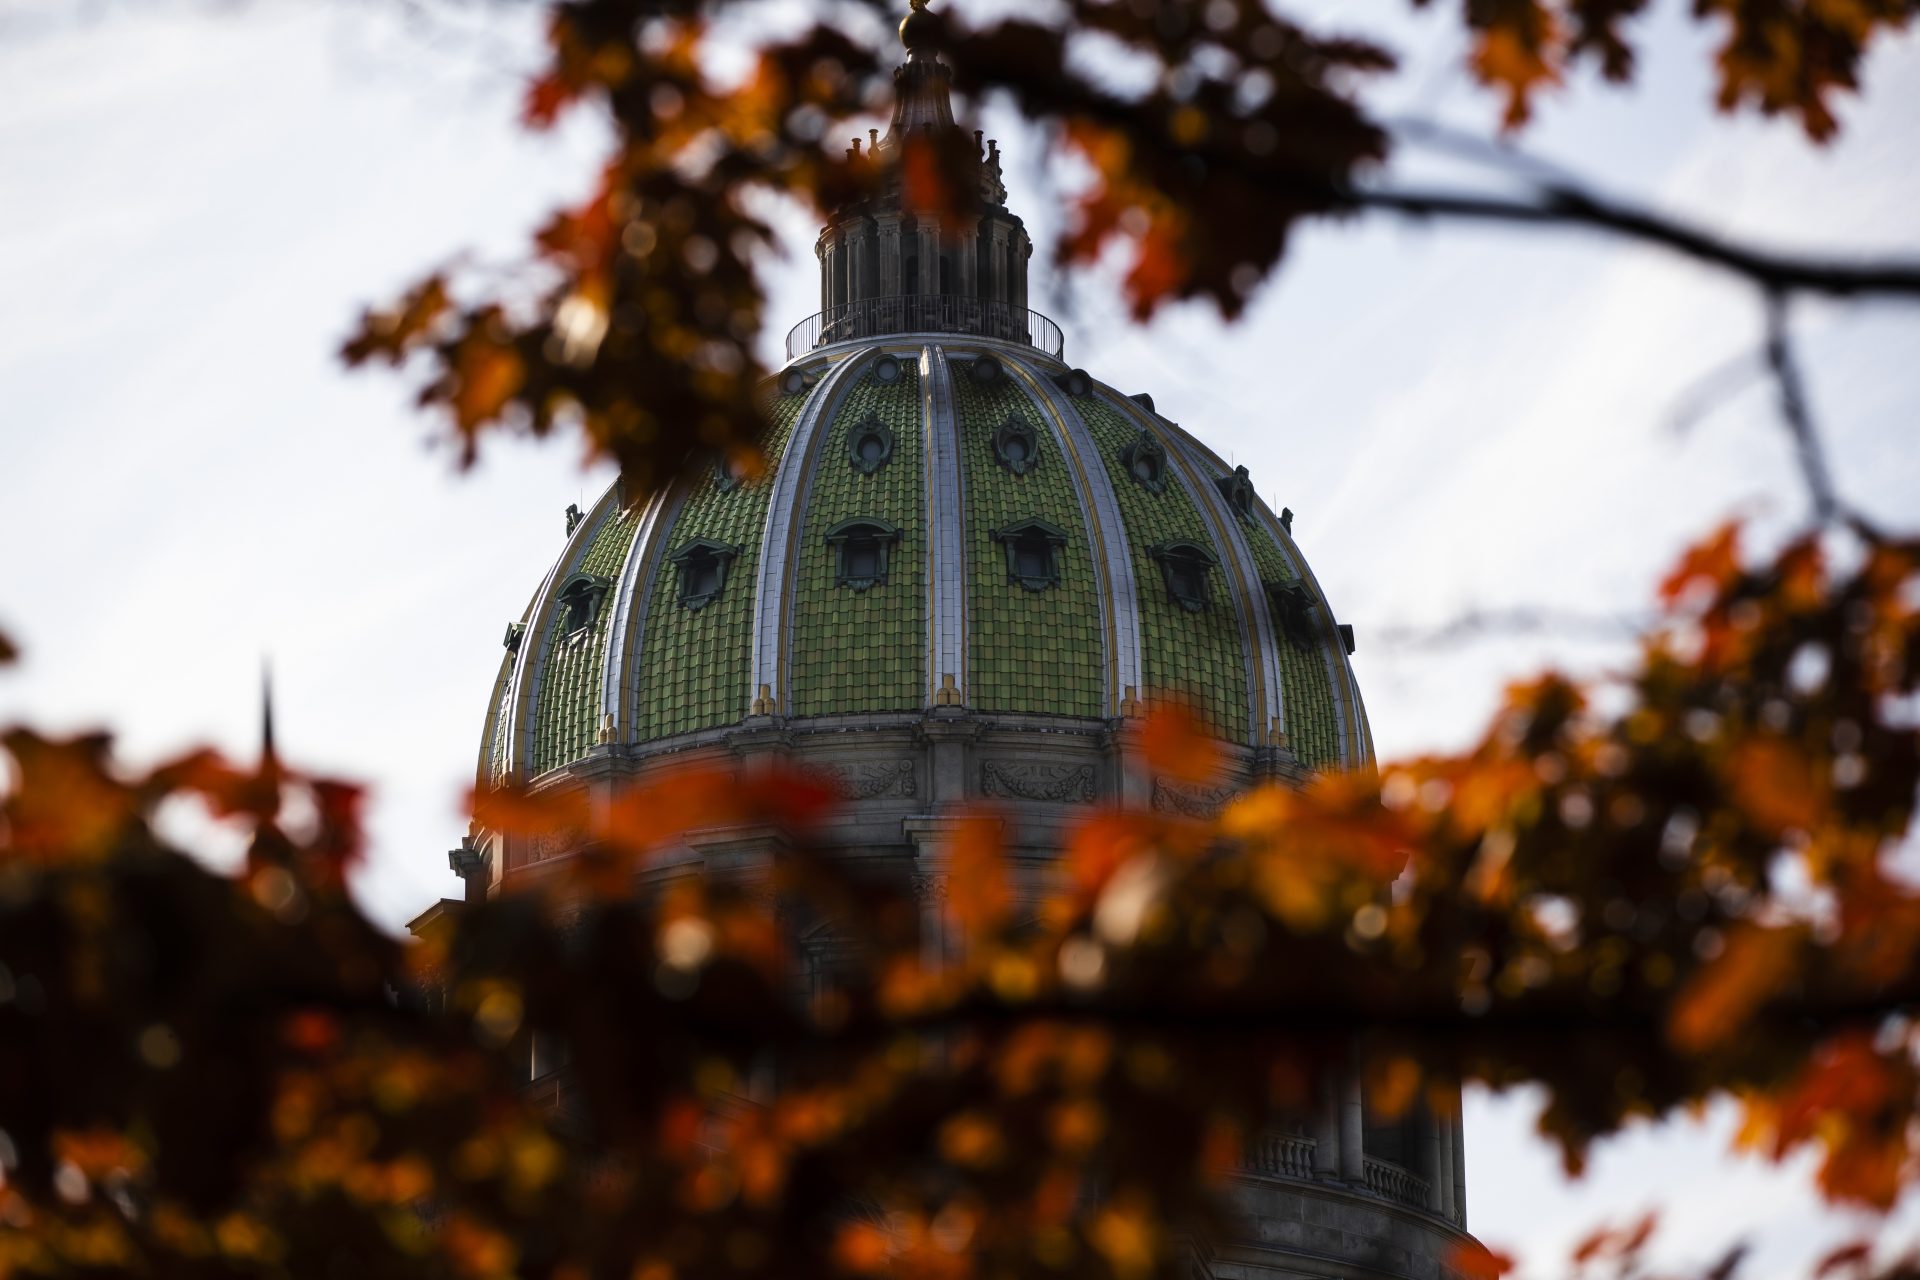 FILE PHOTO: In this file photo from Nov. 19, 2019, the dome of the Pennsylvania Capitol is visible through the fall trees in Harrisburg, Pa.